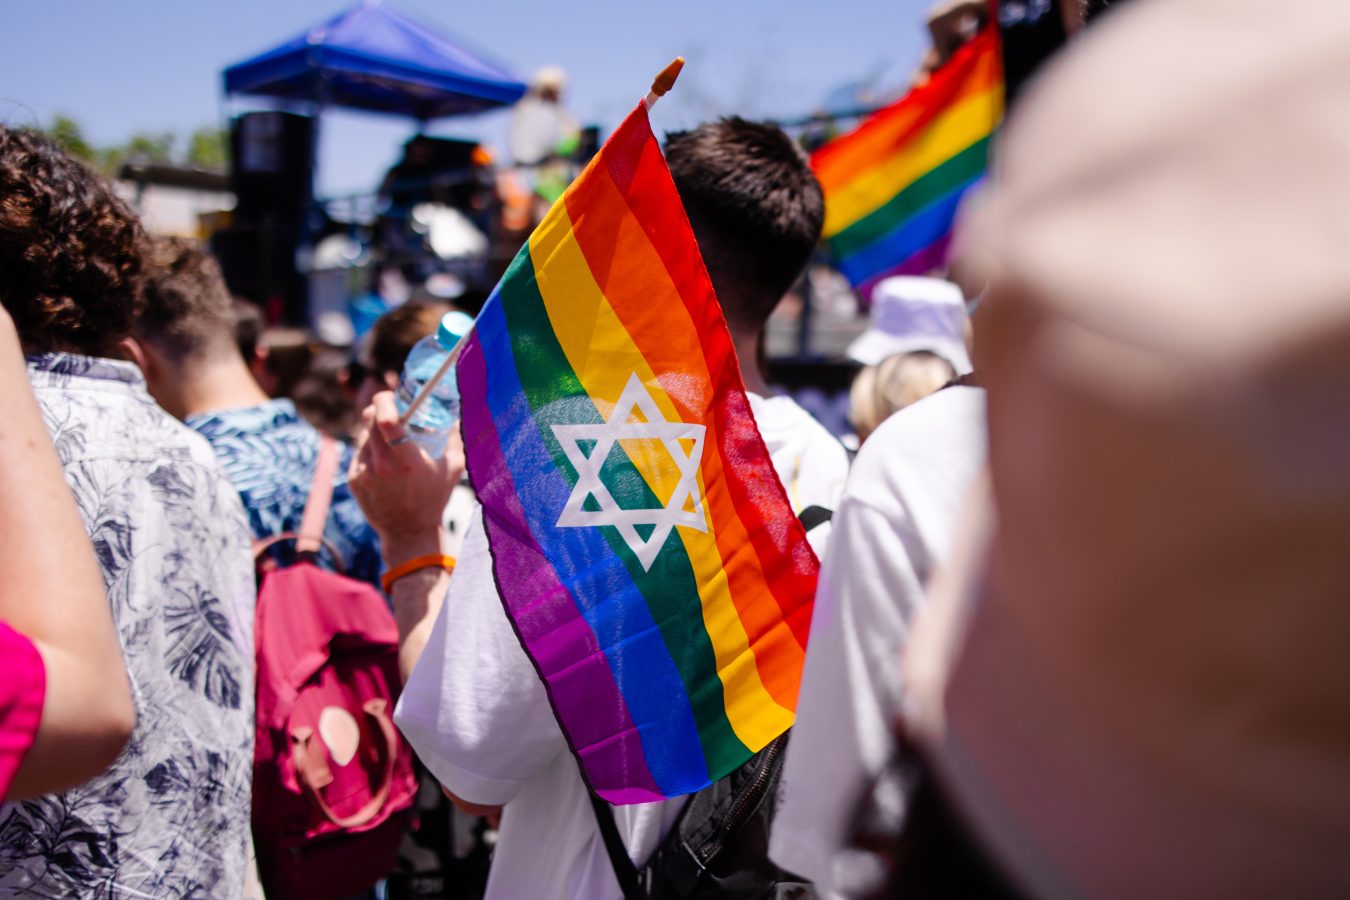 Pride parade in Tel Aviv, Israel, with participants holding rainbow flags with the Star of David.